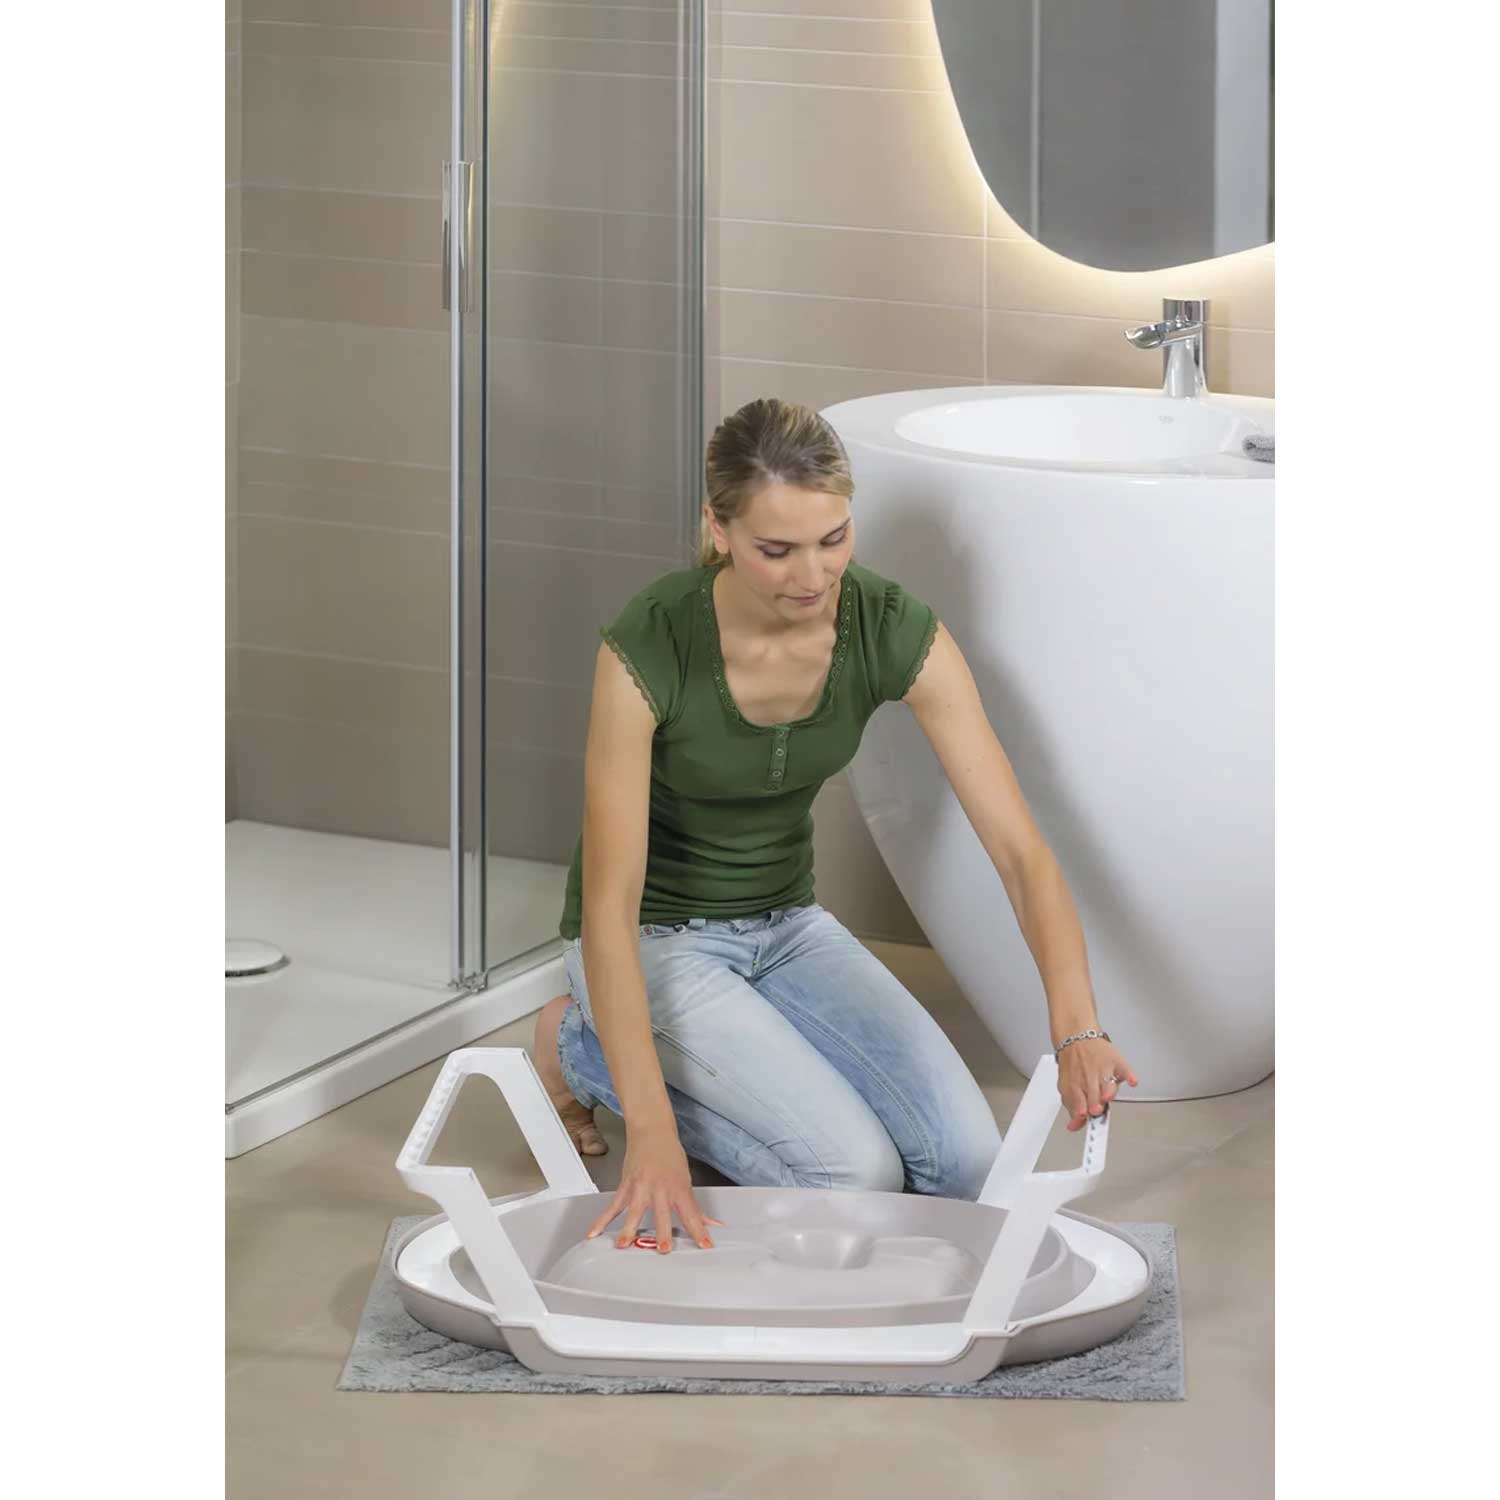 OKBABY Onda Slim Folding Baby Bath with support post, White : :  Baby Products